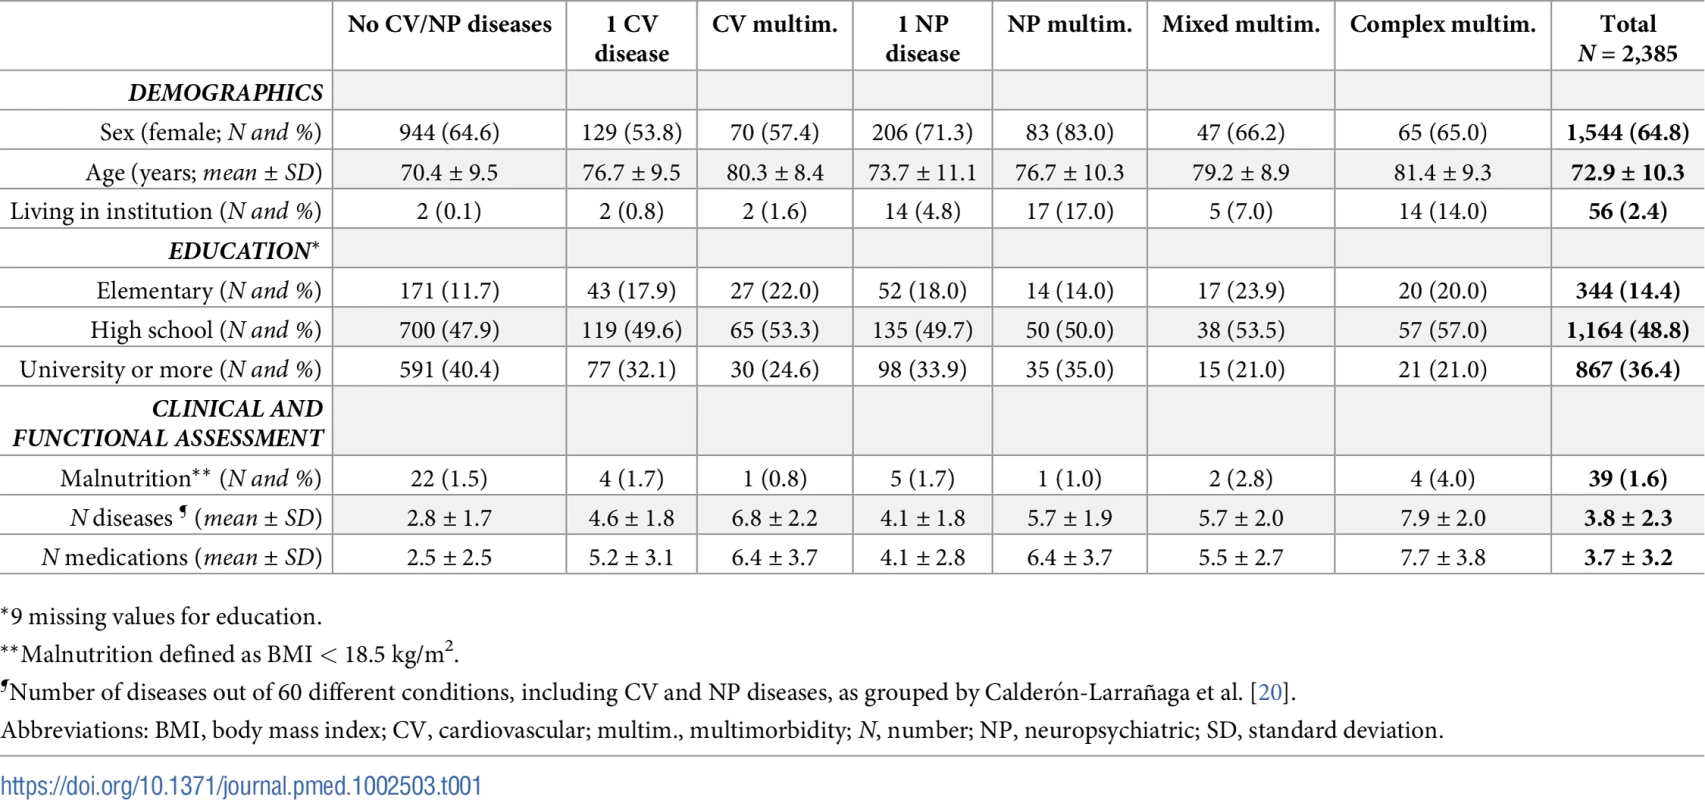 Sample characteristics at baseline by patterns of CV and NP chronic diseases.